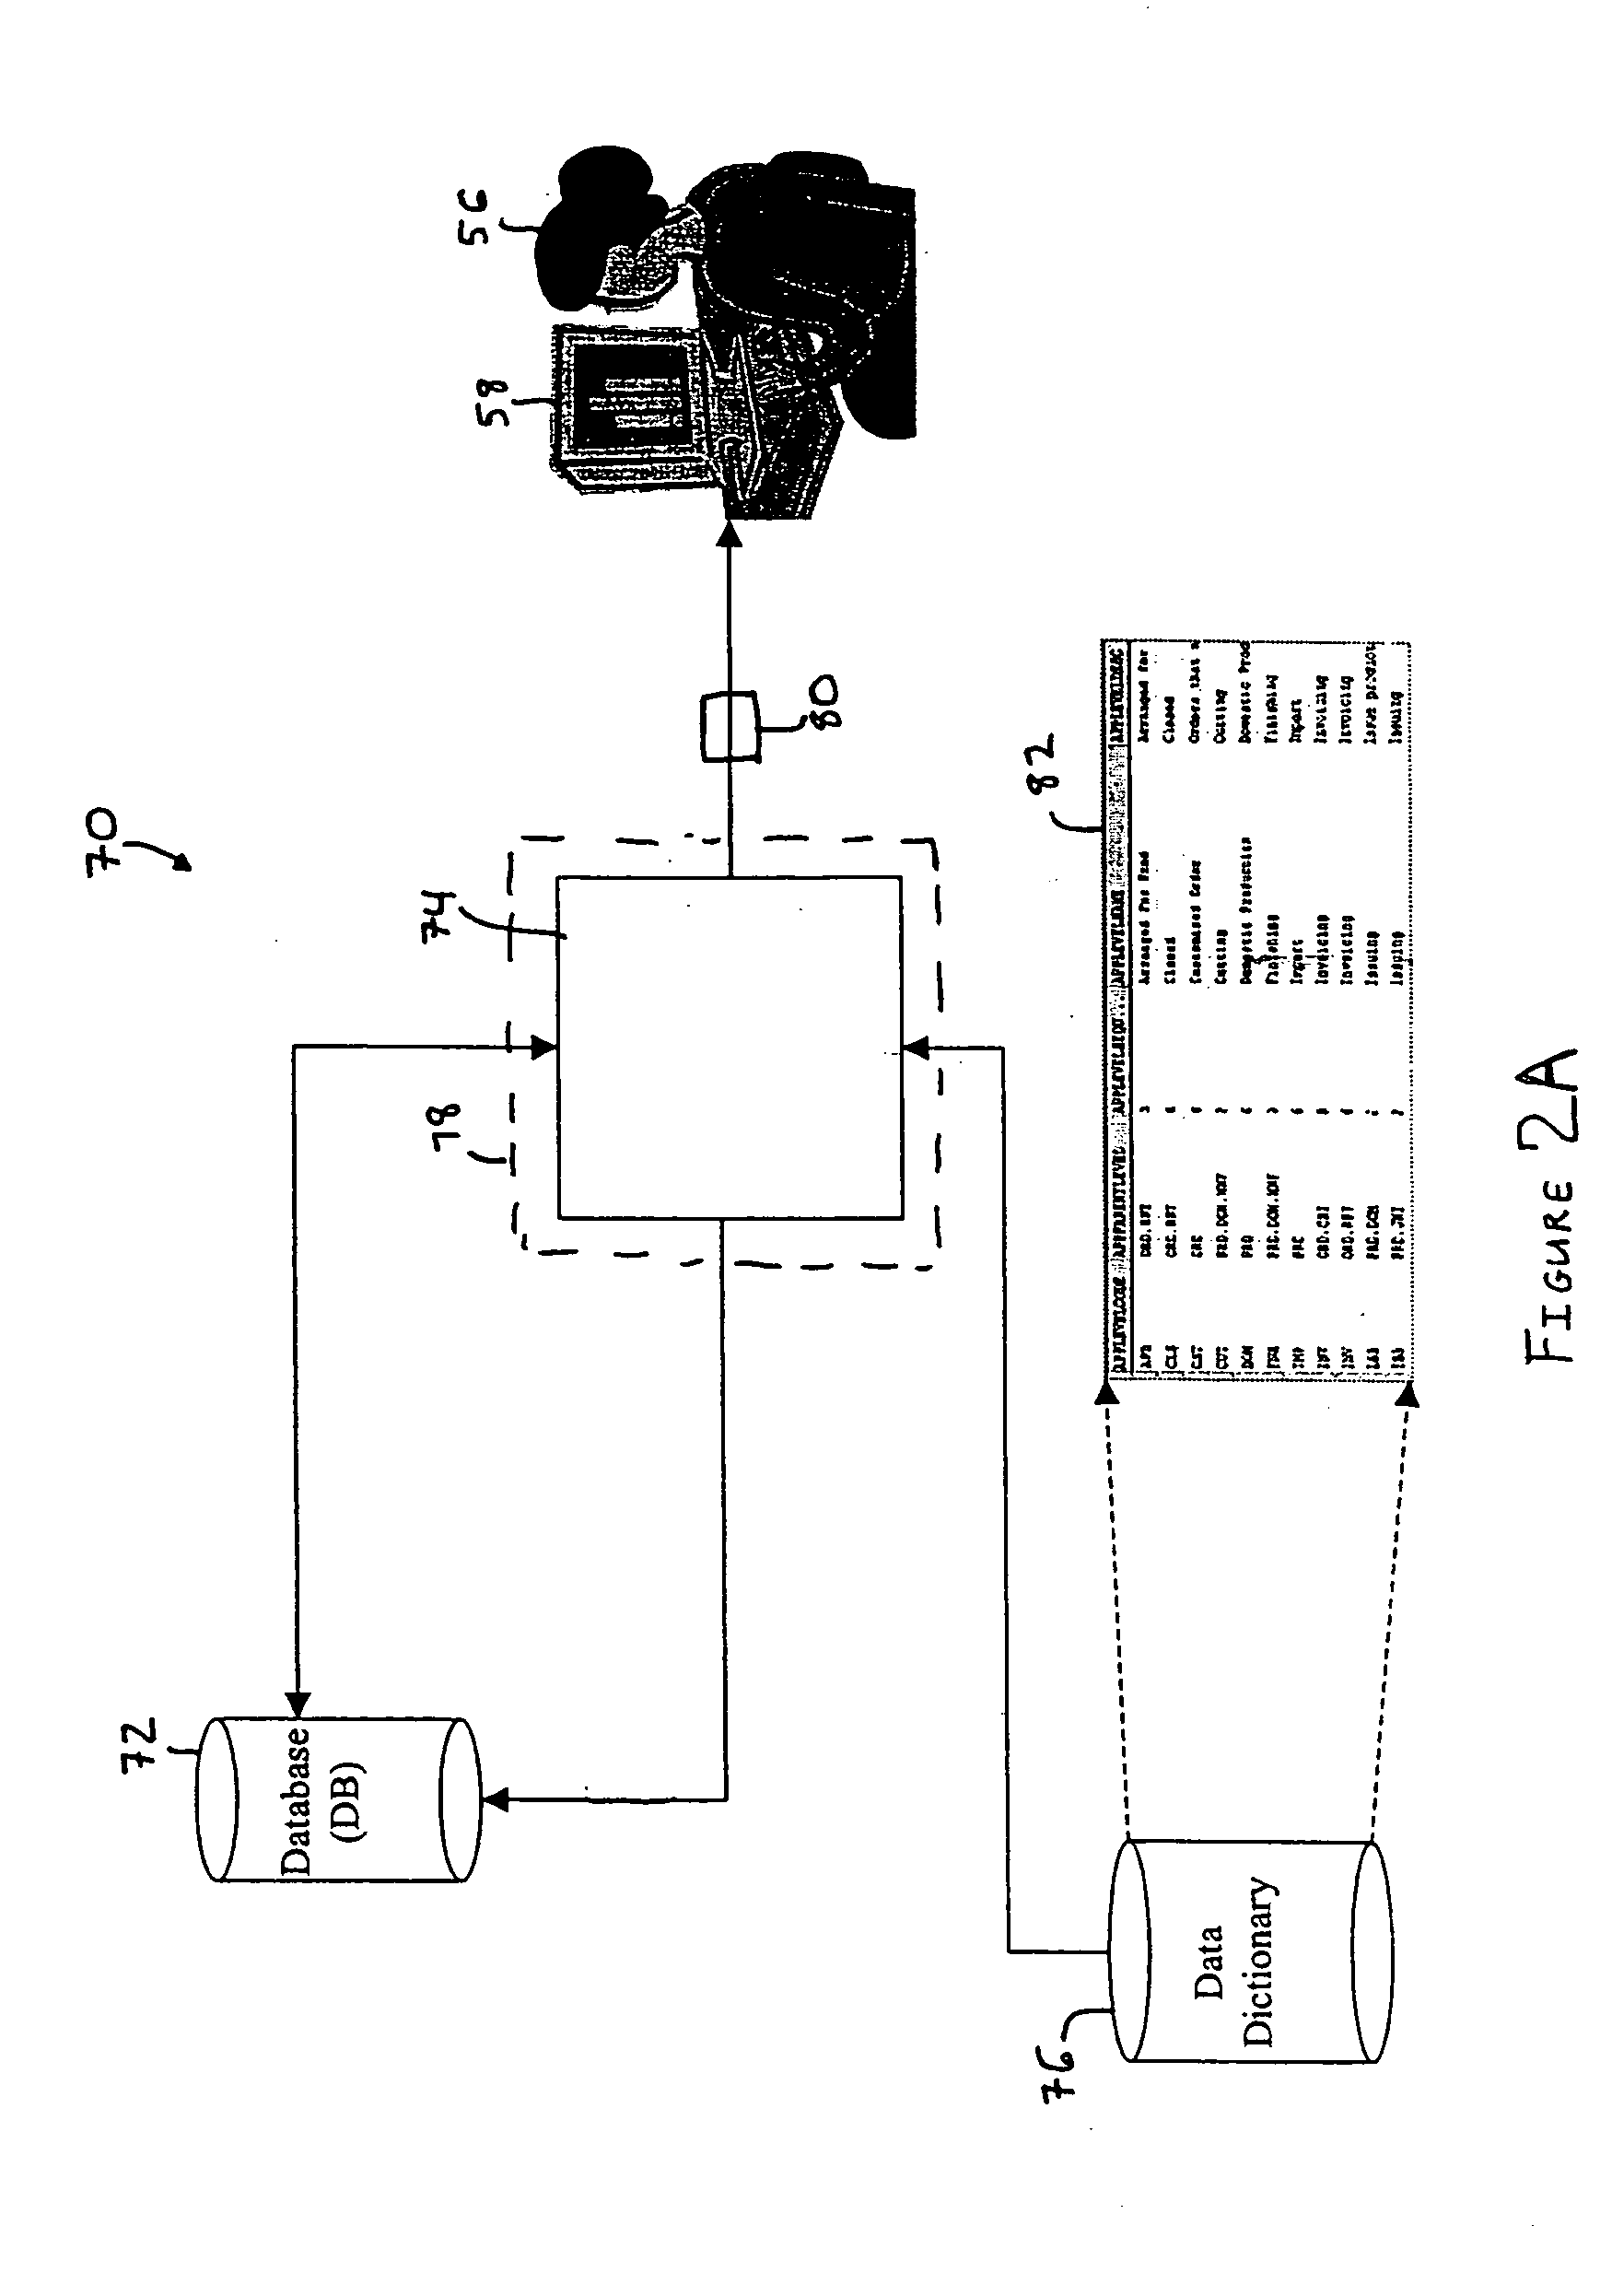 Business software application generation system and method